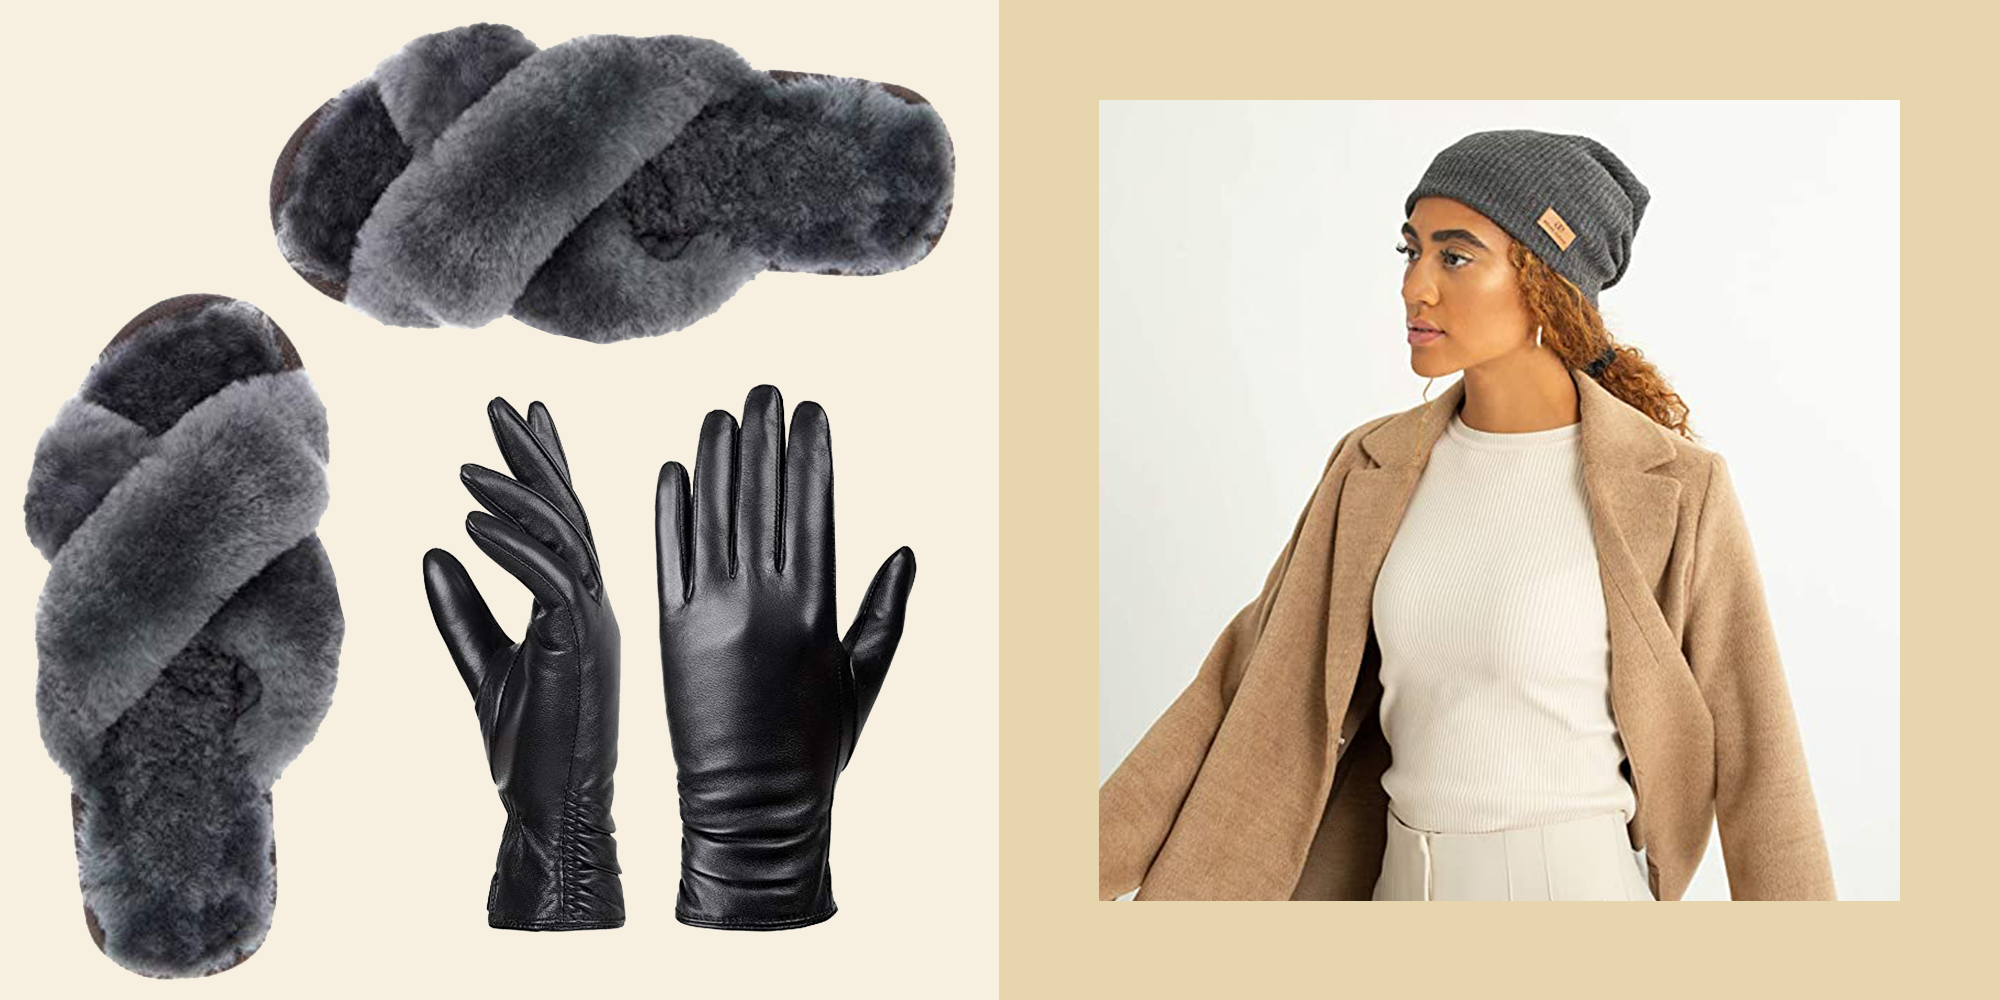 of Best, Most Affordable Winter Accessories on Amazon